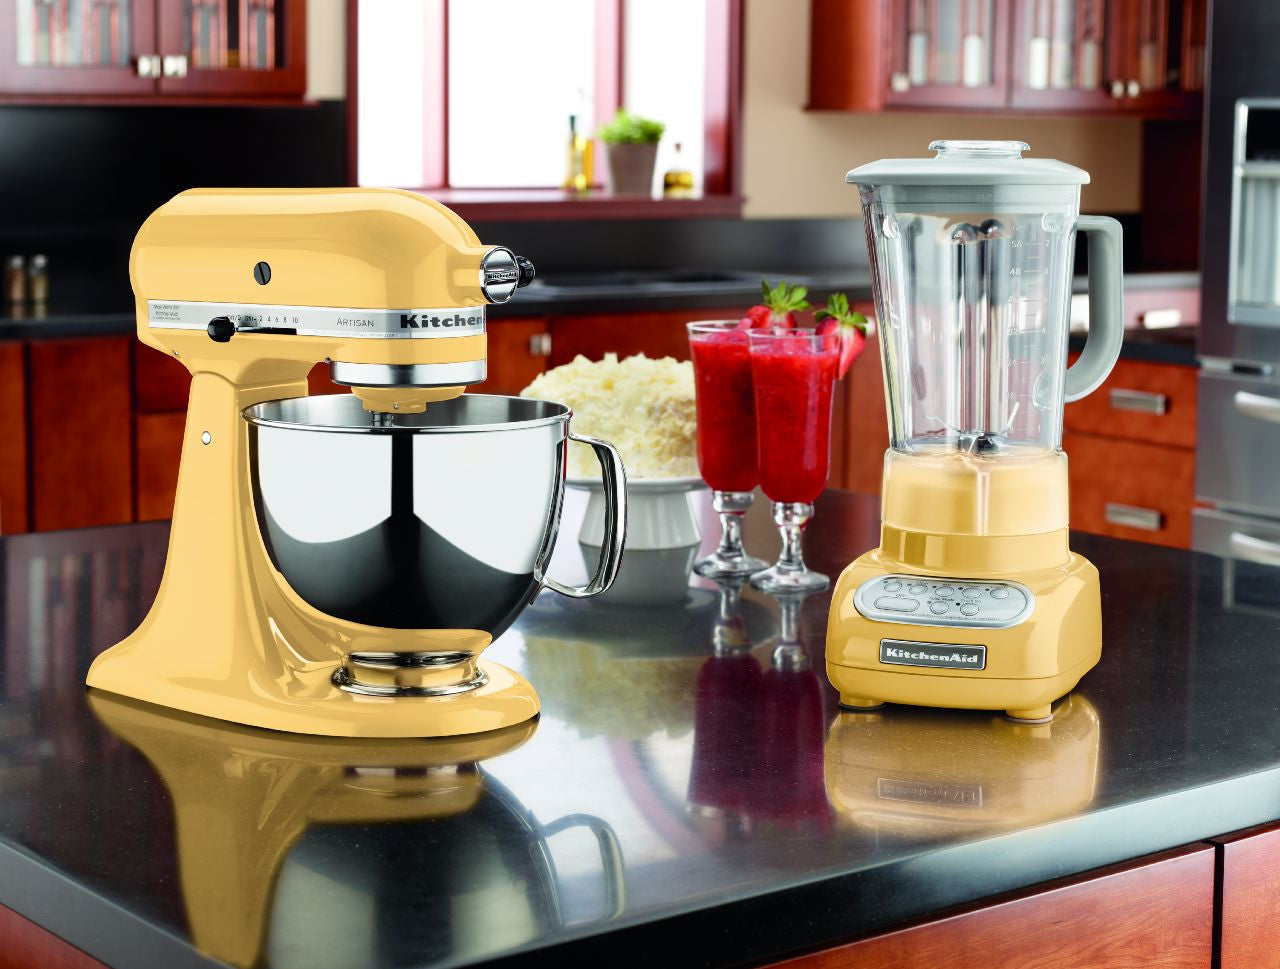 KitchenAid KSM150PSMY Artisan Series 5-Qt. Stand Mixer with Pouring Shield  - Majestic Yellow - Trademark Retail